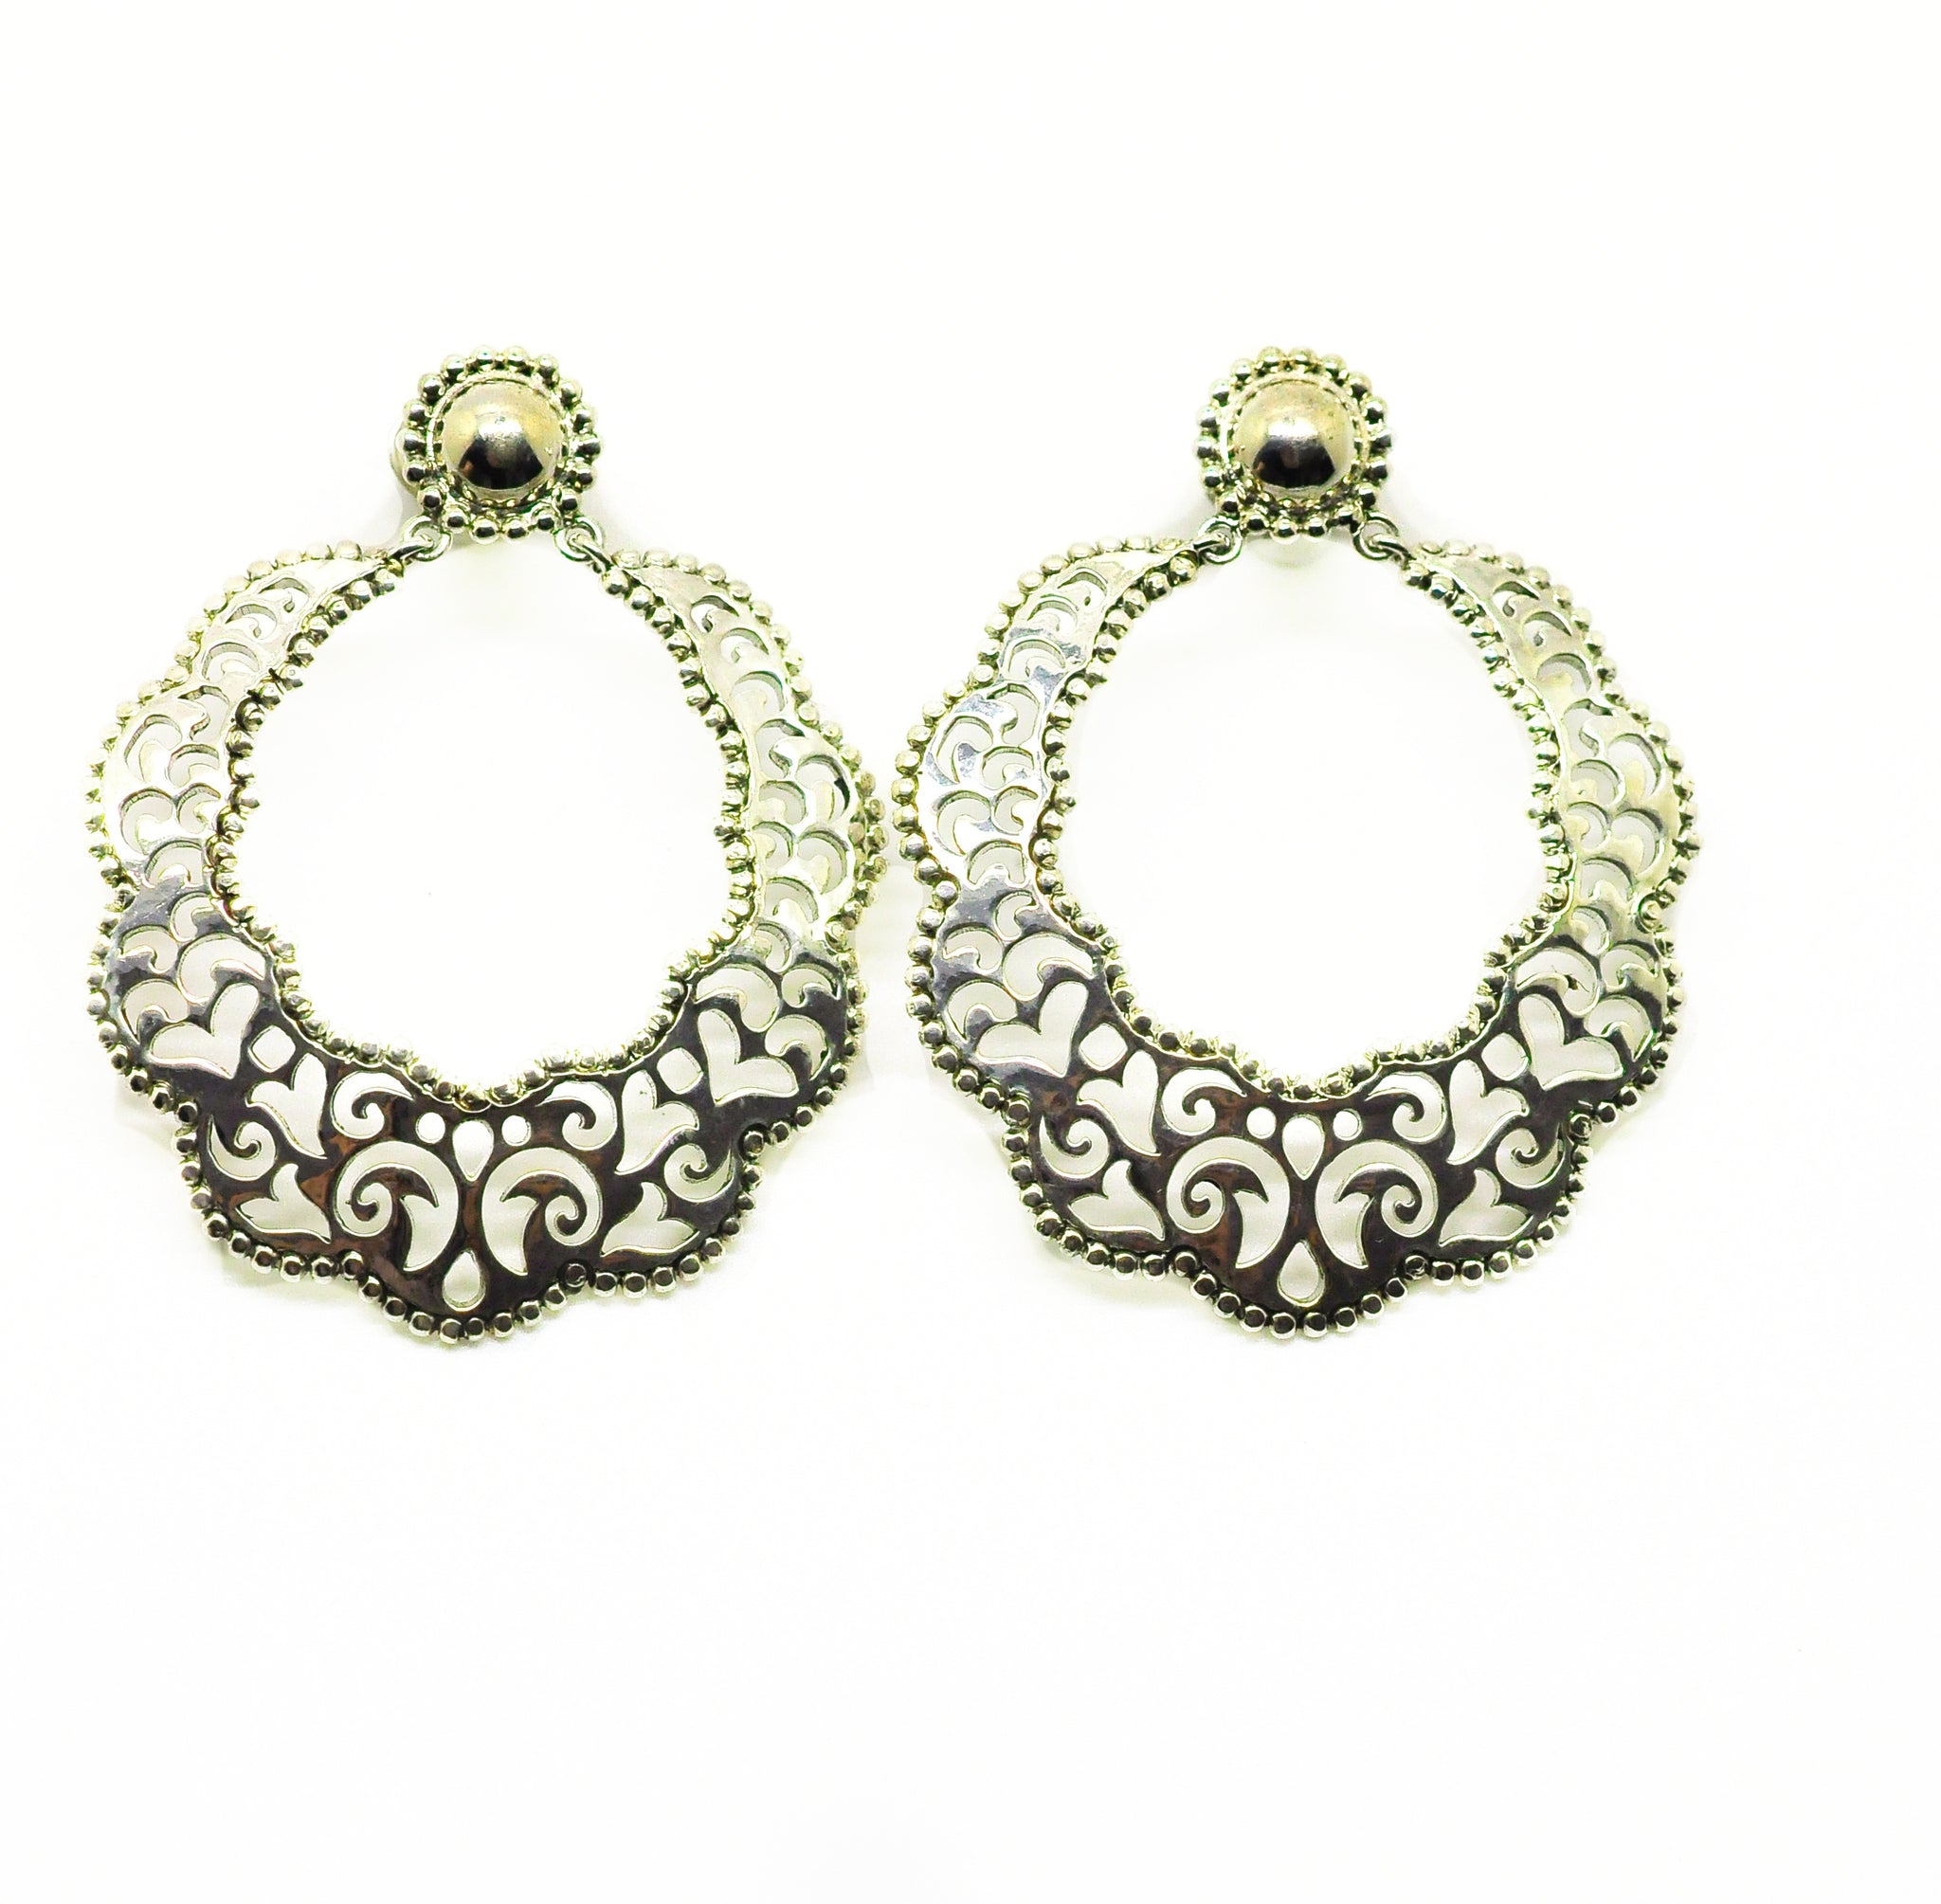 SOLD - ON SALE Indian filigree 4 - Silver